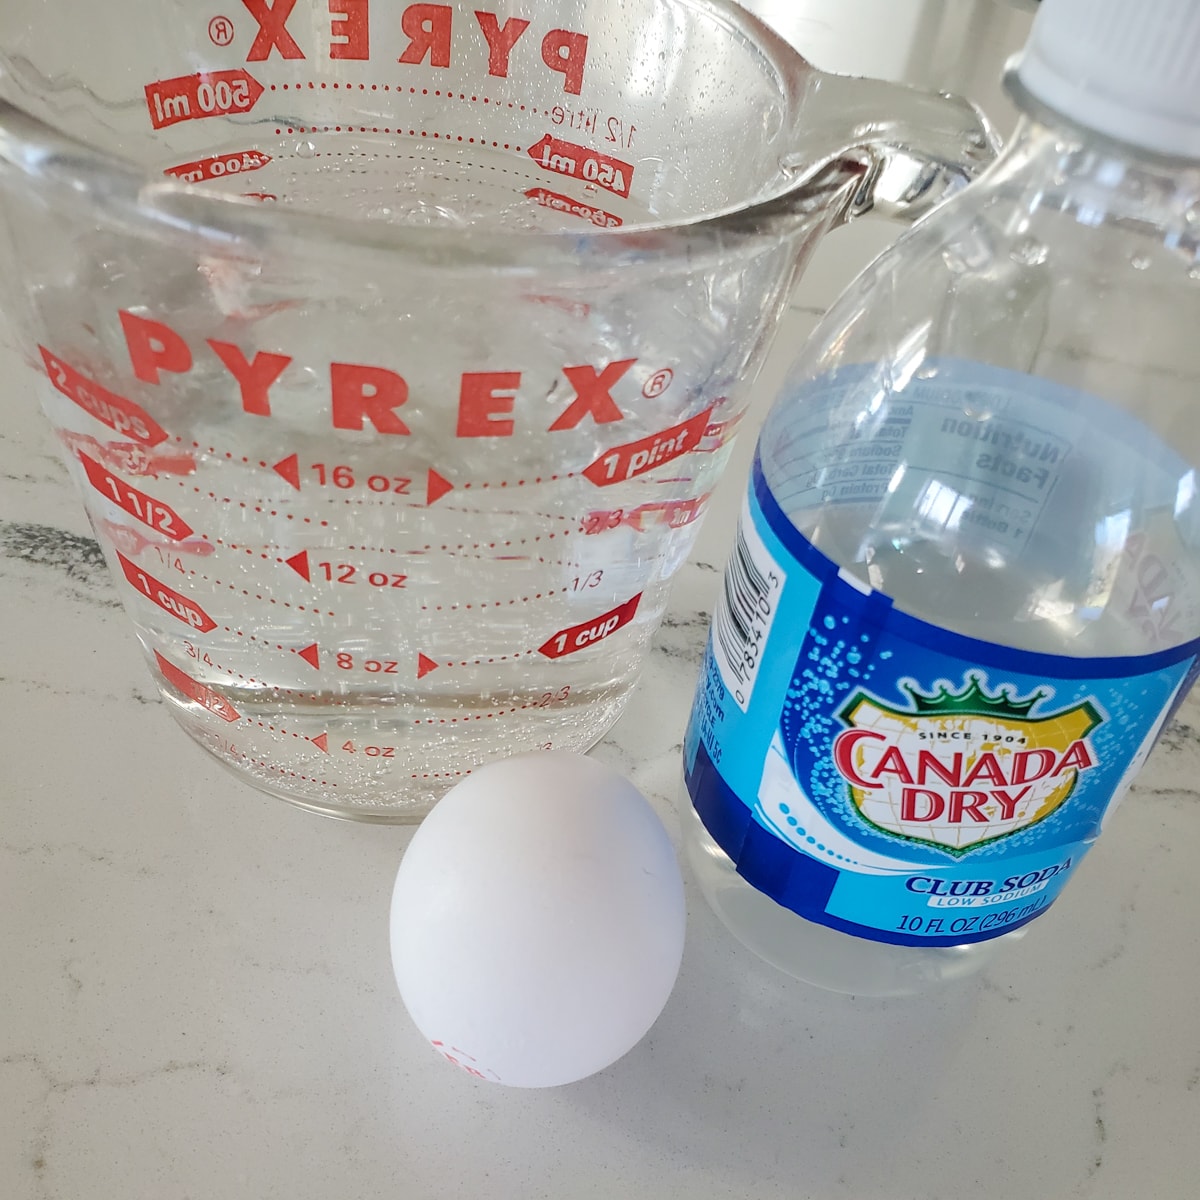 Club soda and an egg on a countertop.